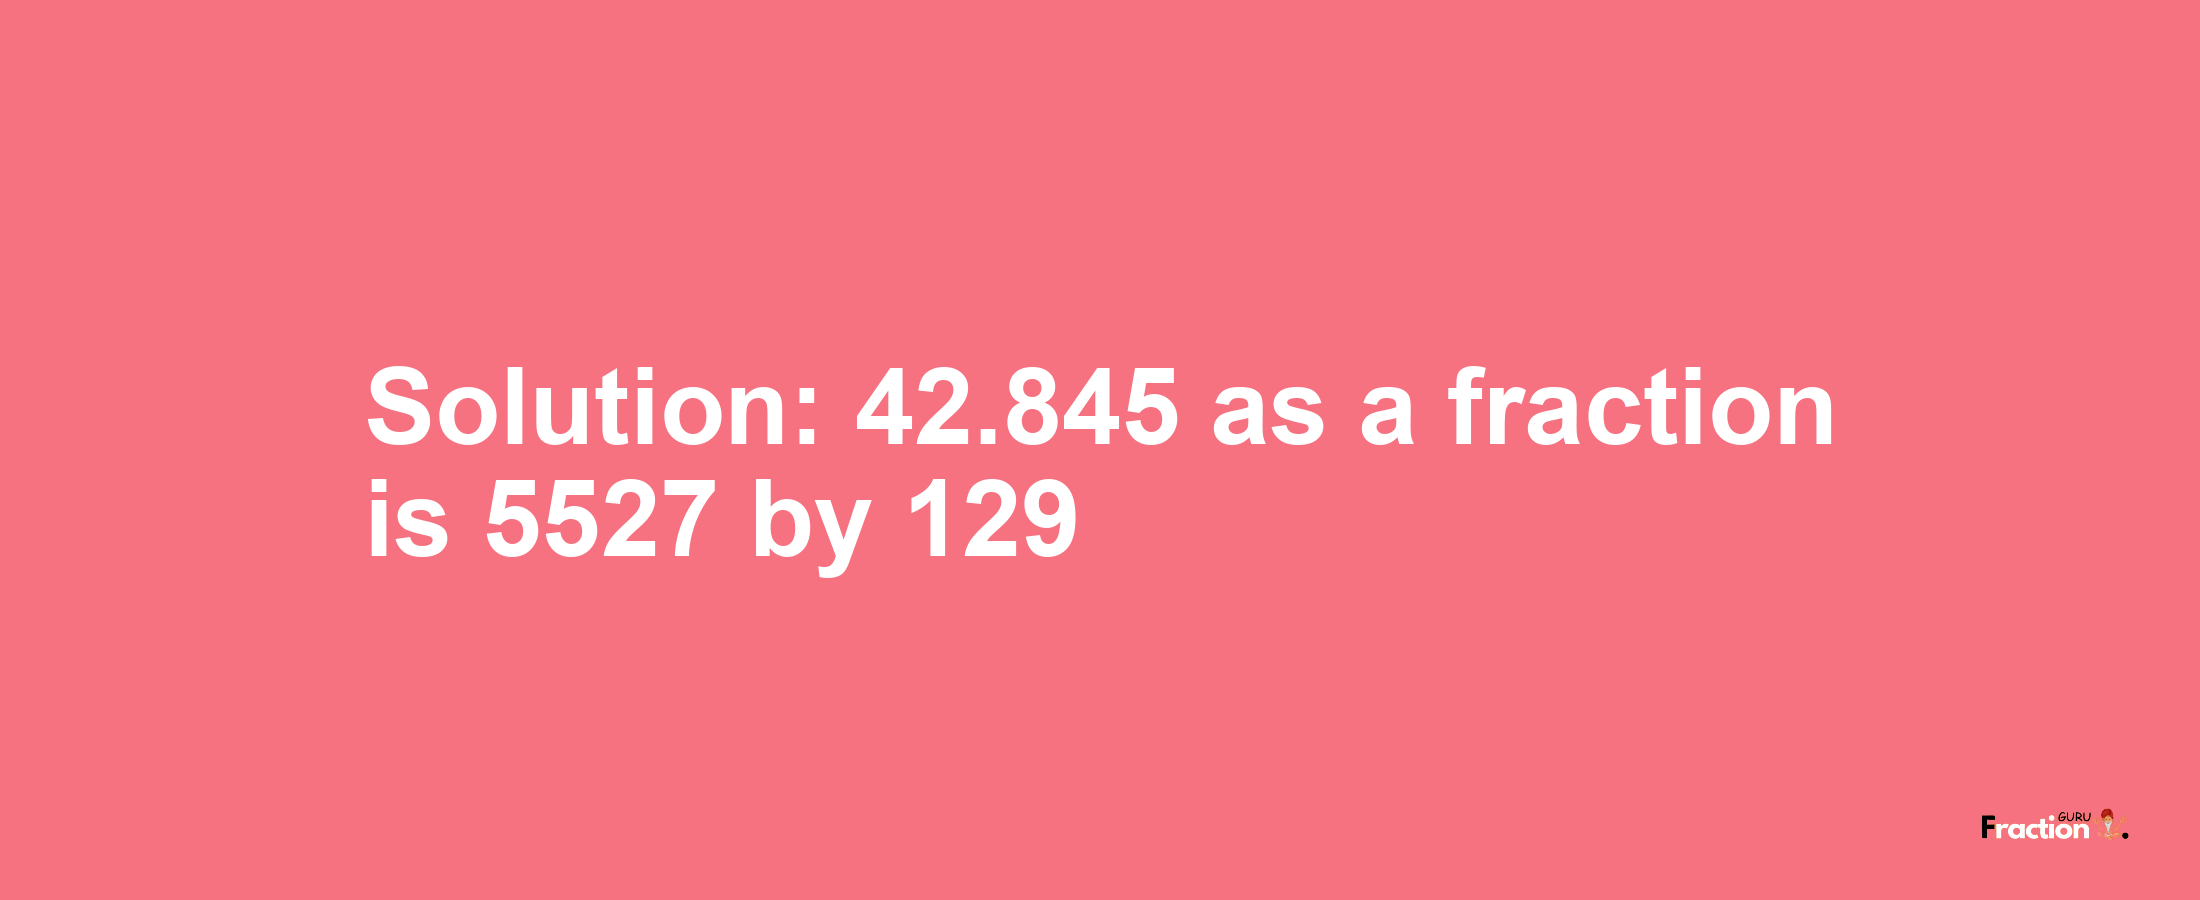 Solution:42.845 as a fraction is 5527/129